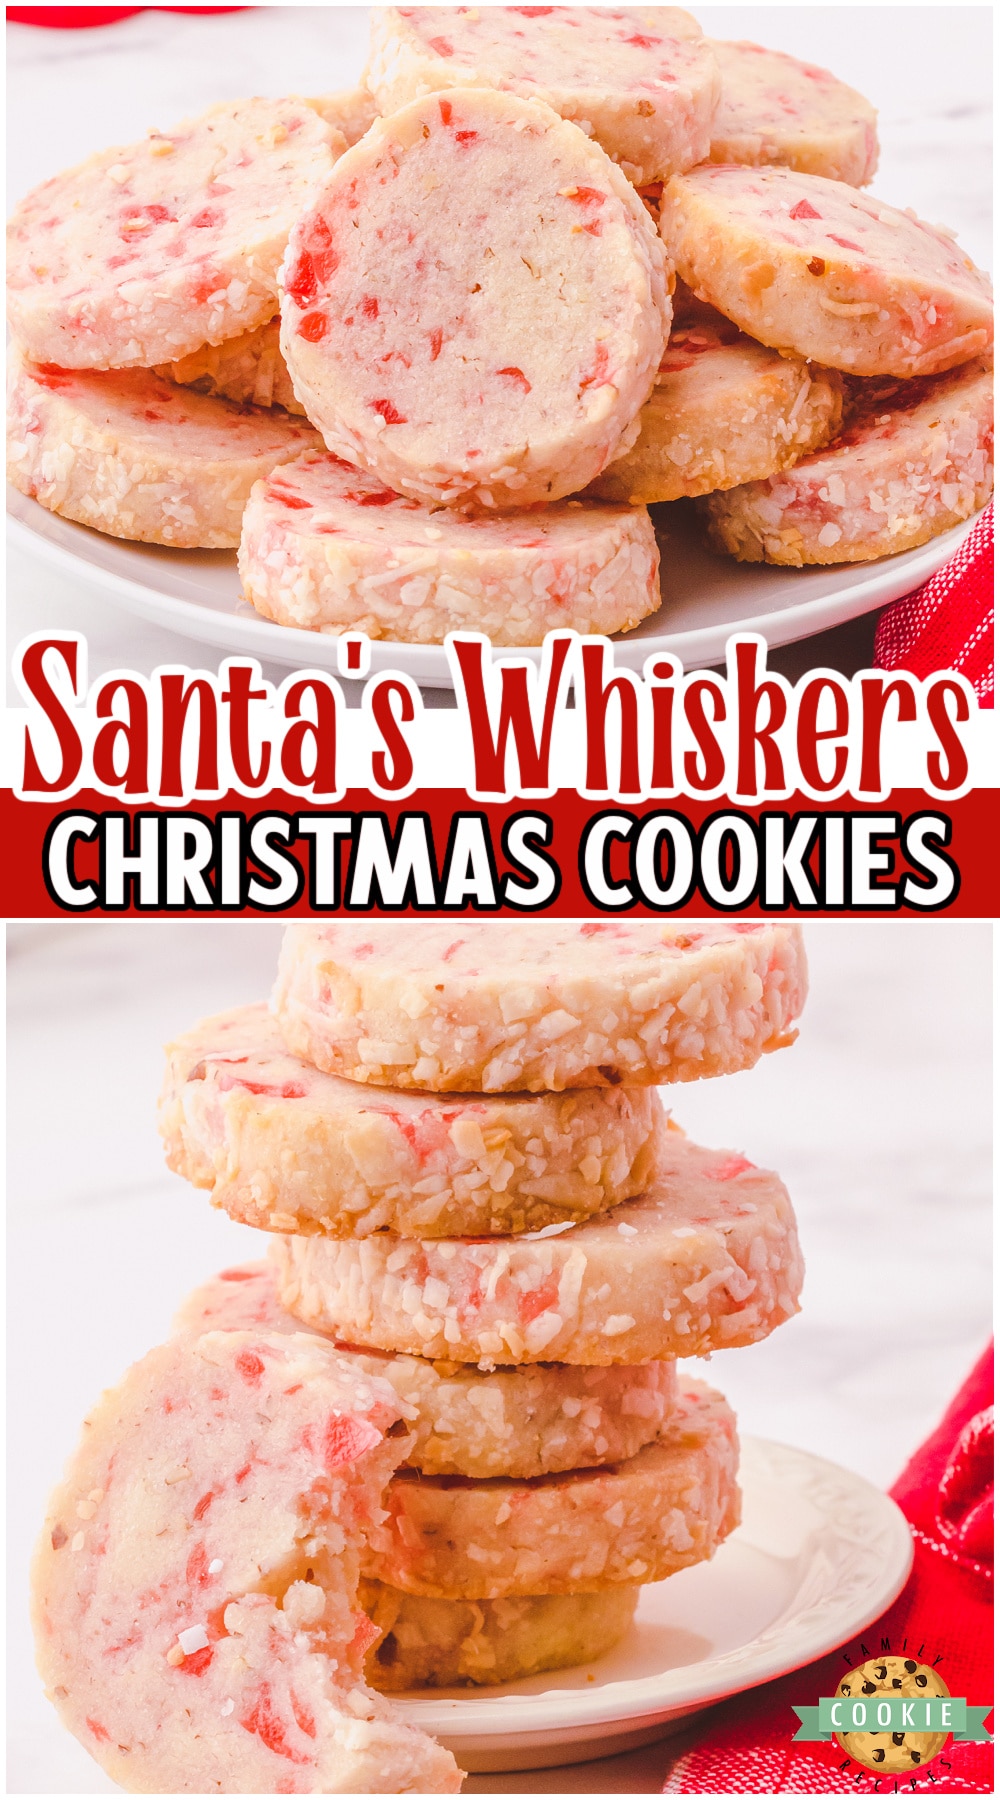 Santa's Whiskers Cookies are buttery cookies made with sweet cherries & pecans, then rolled in coconut for the classic look! Delicious slice and bake shortbread cookies made festive for Christmas!  via @buttergirls